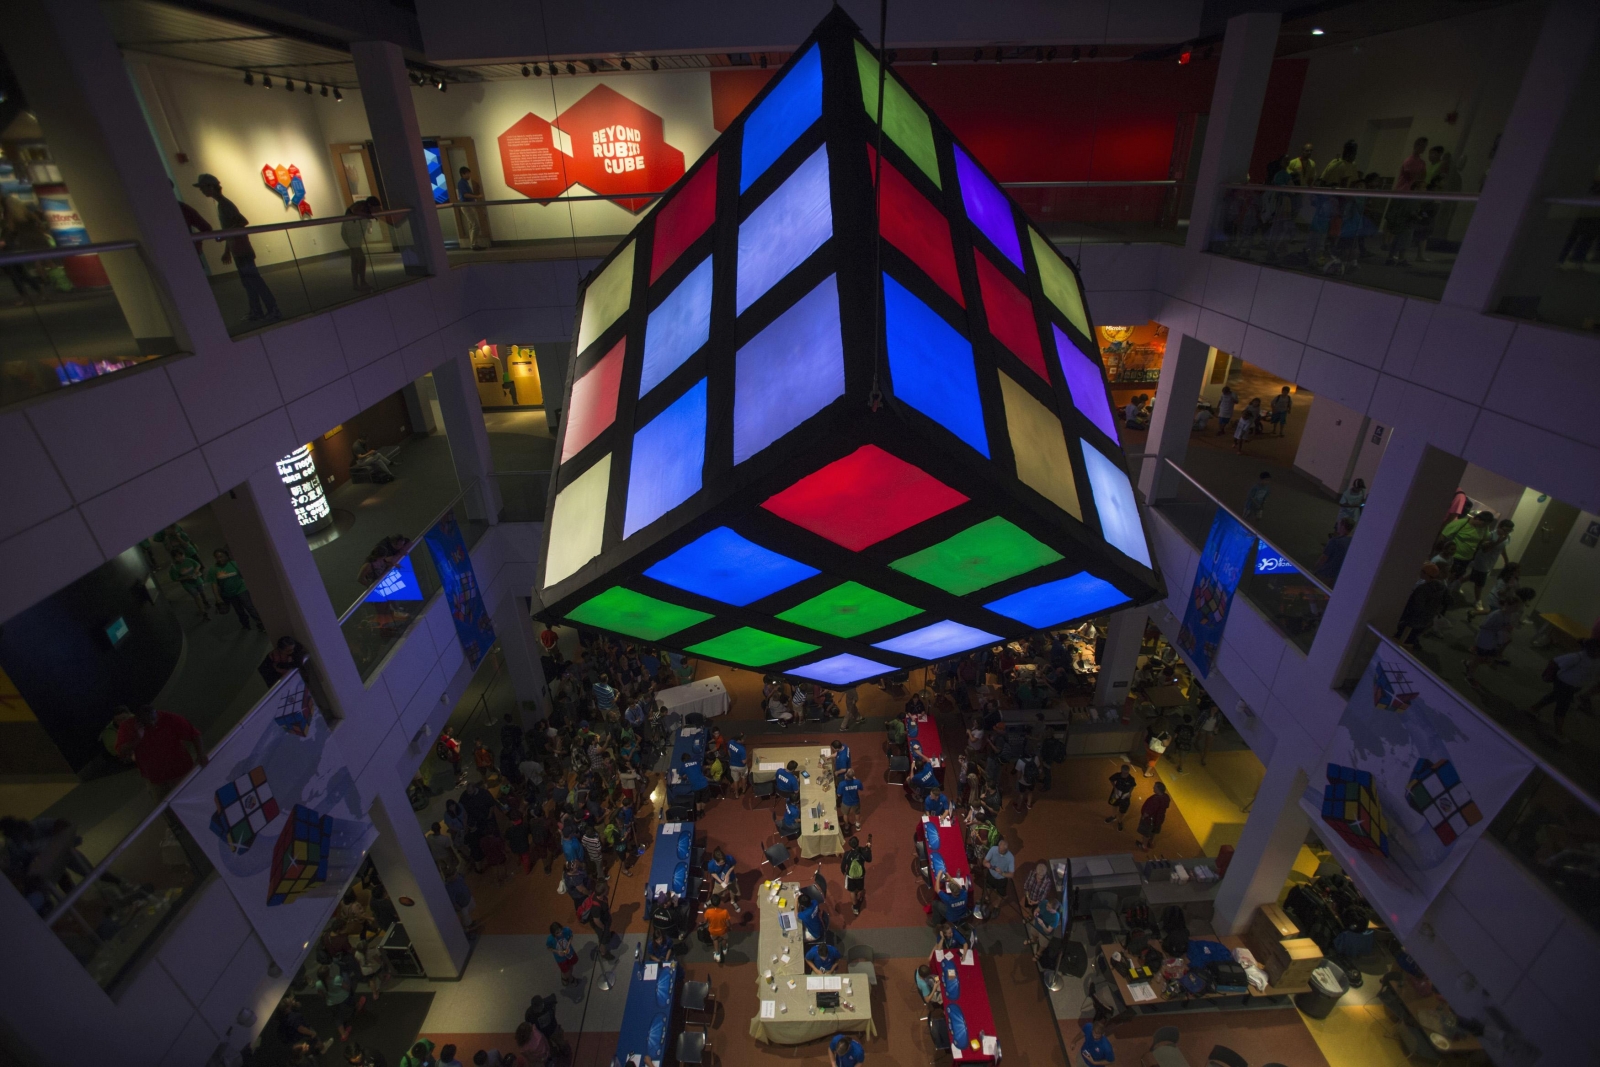 Rubiks Cube looks down over the crowd of participants